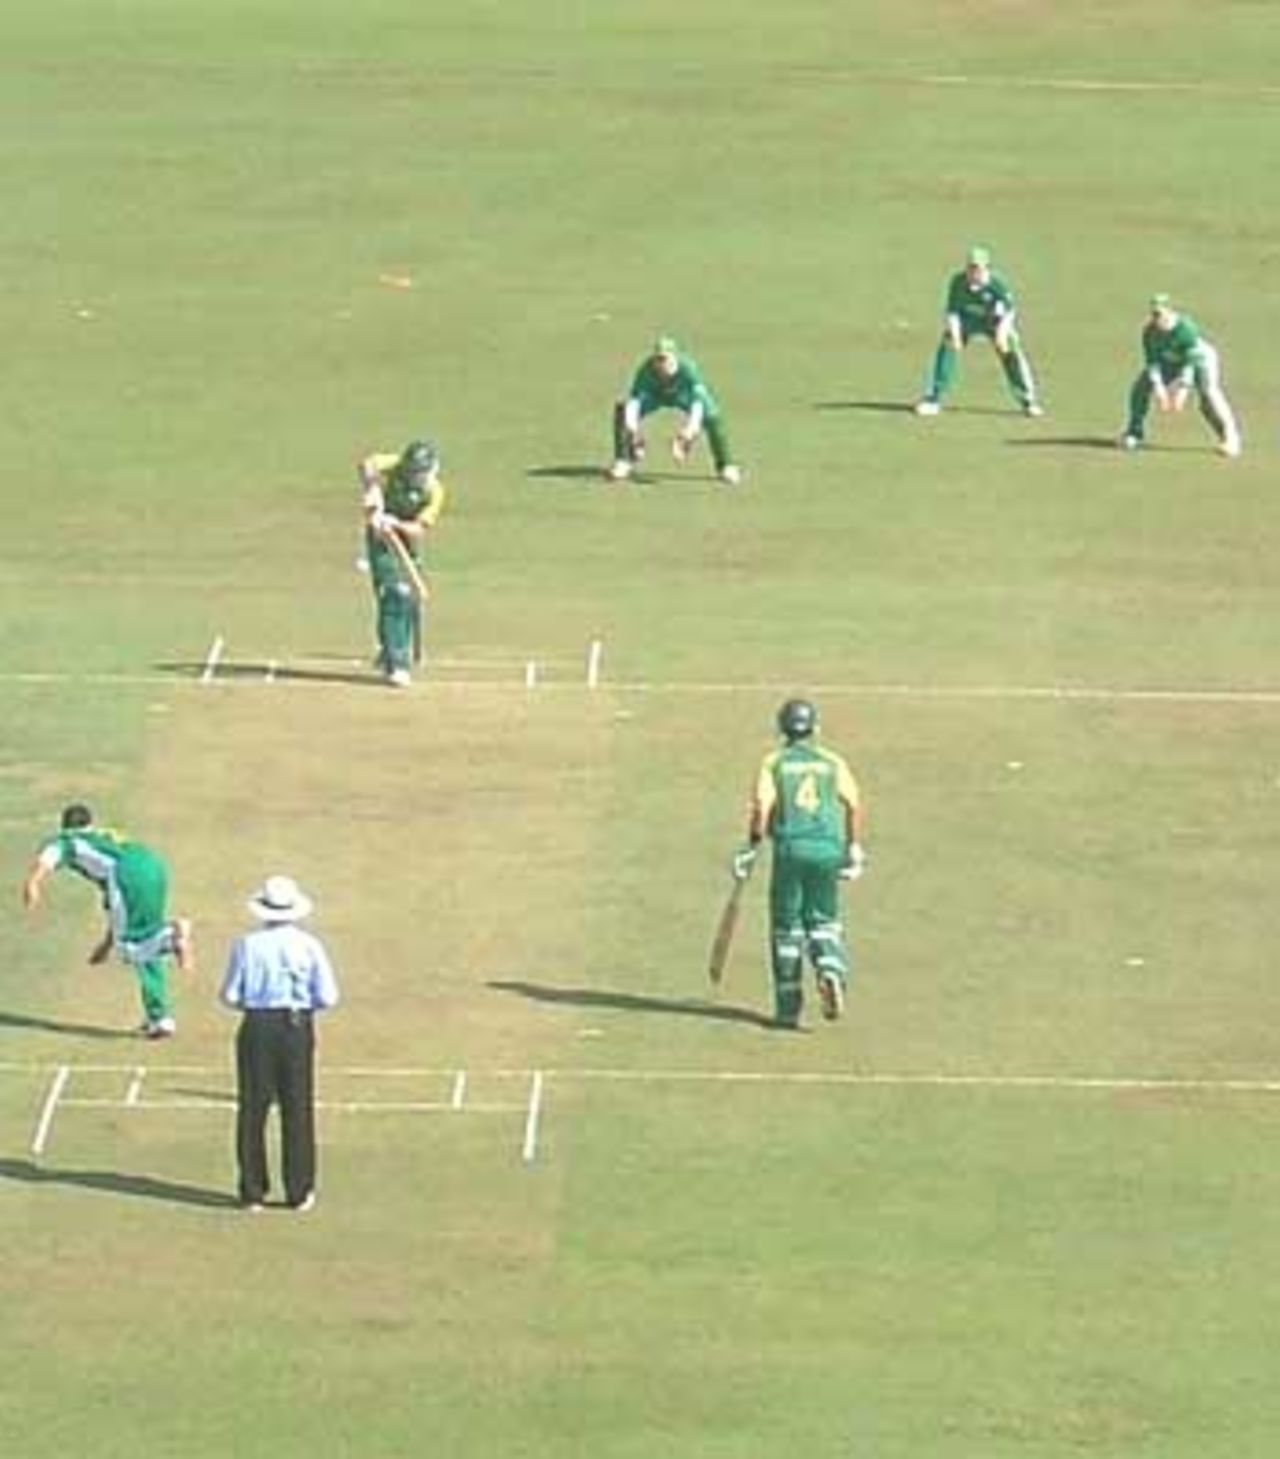 Craig Alexander bowls the first ball of the match, Australia Under-19s v South Africa Under-19s, Colombo, February 5, 2006